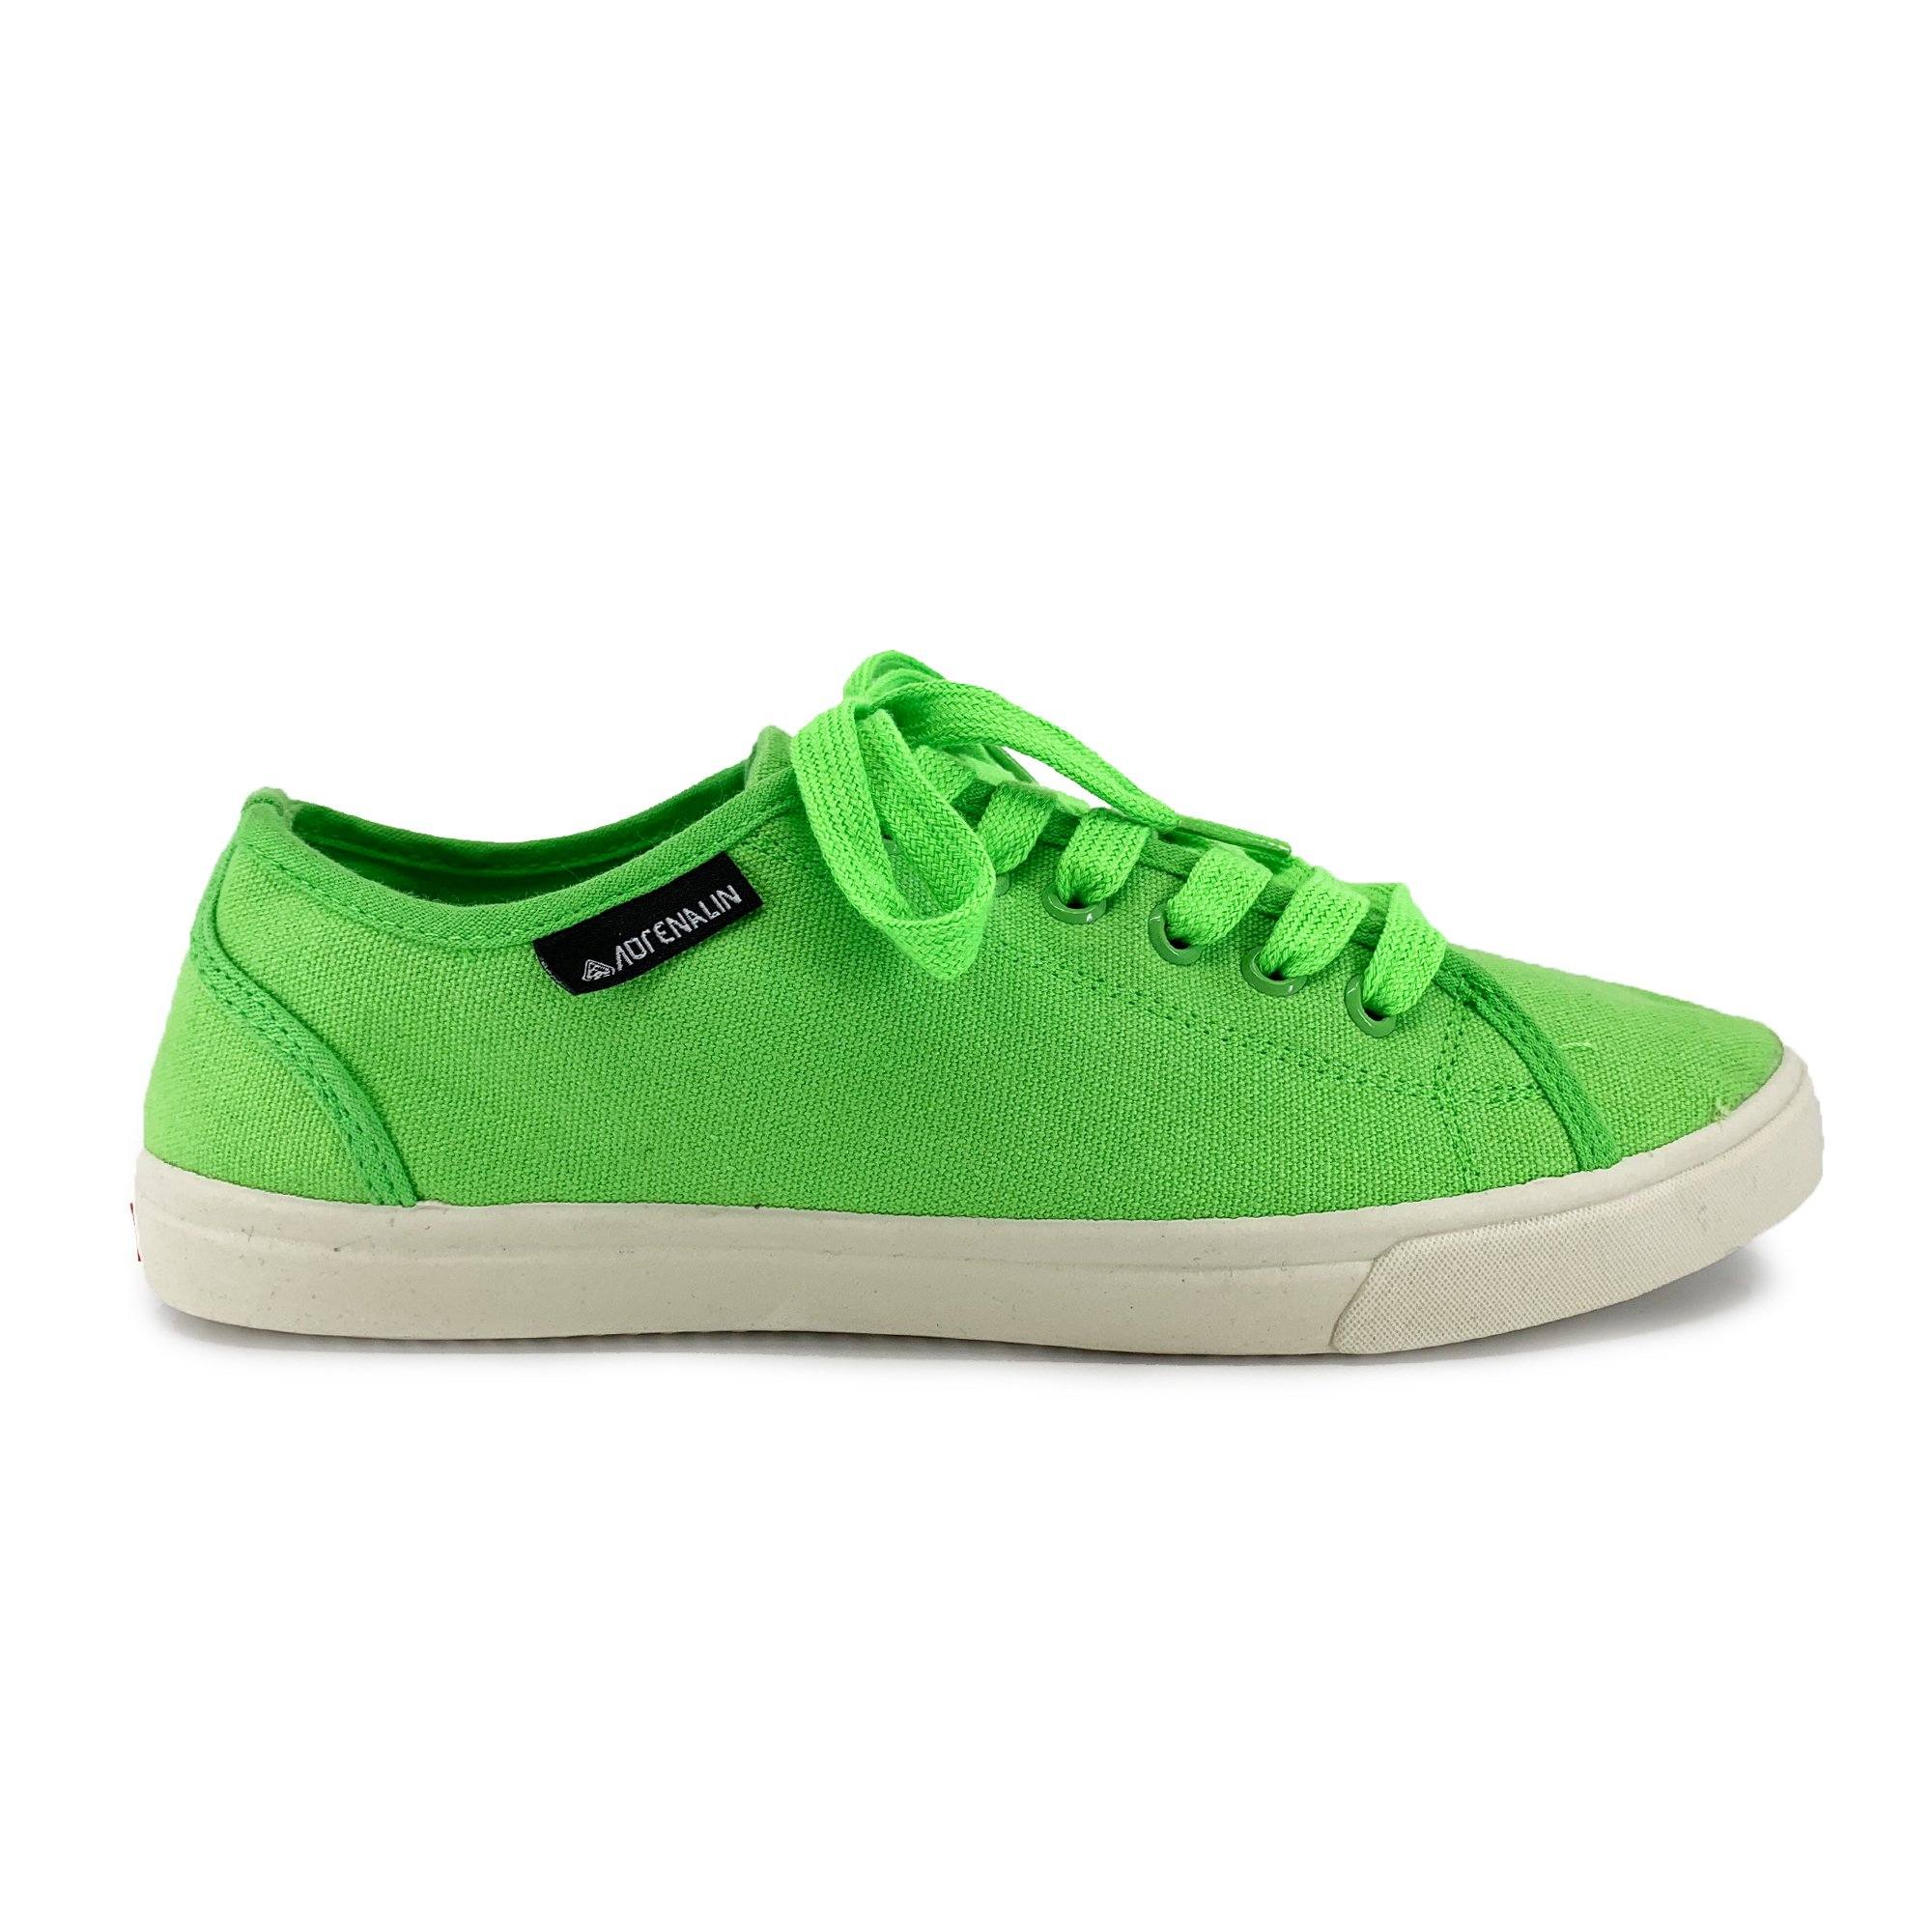 lime green canvas shoes